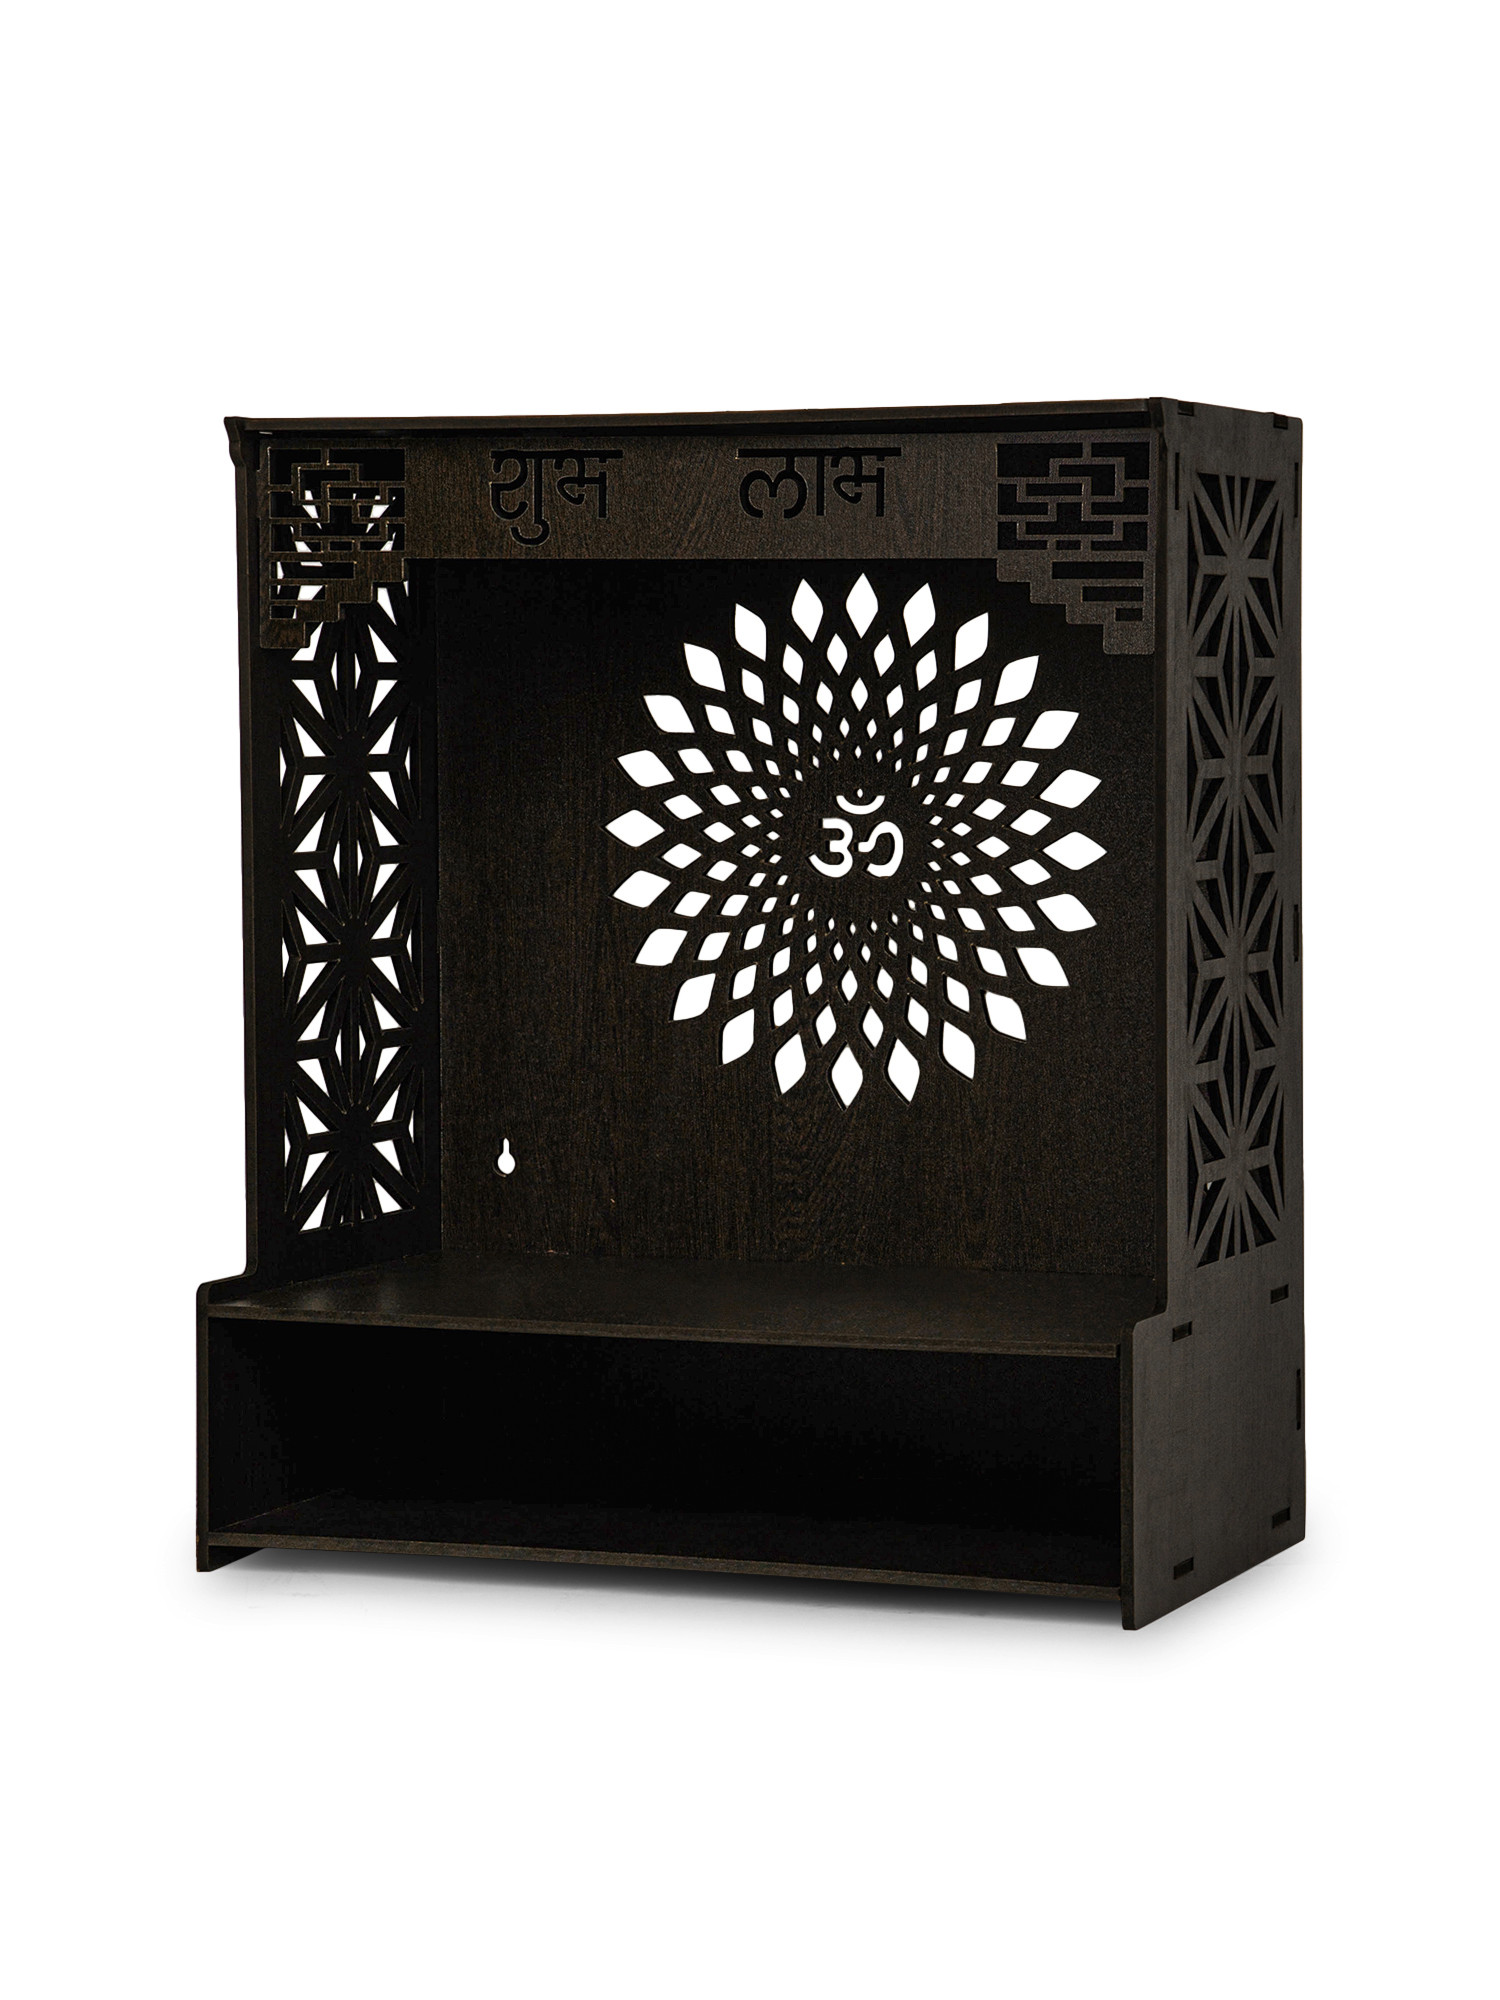 Kuber Industries Pooja Mandir | Pooja Stand for Home | Temple for Home and Office | Wall Mounted Home Temple | Pooja Mandir Stand for Home | Subh Labh Temple | Weinge